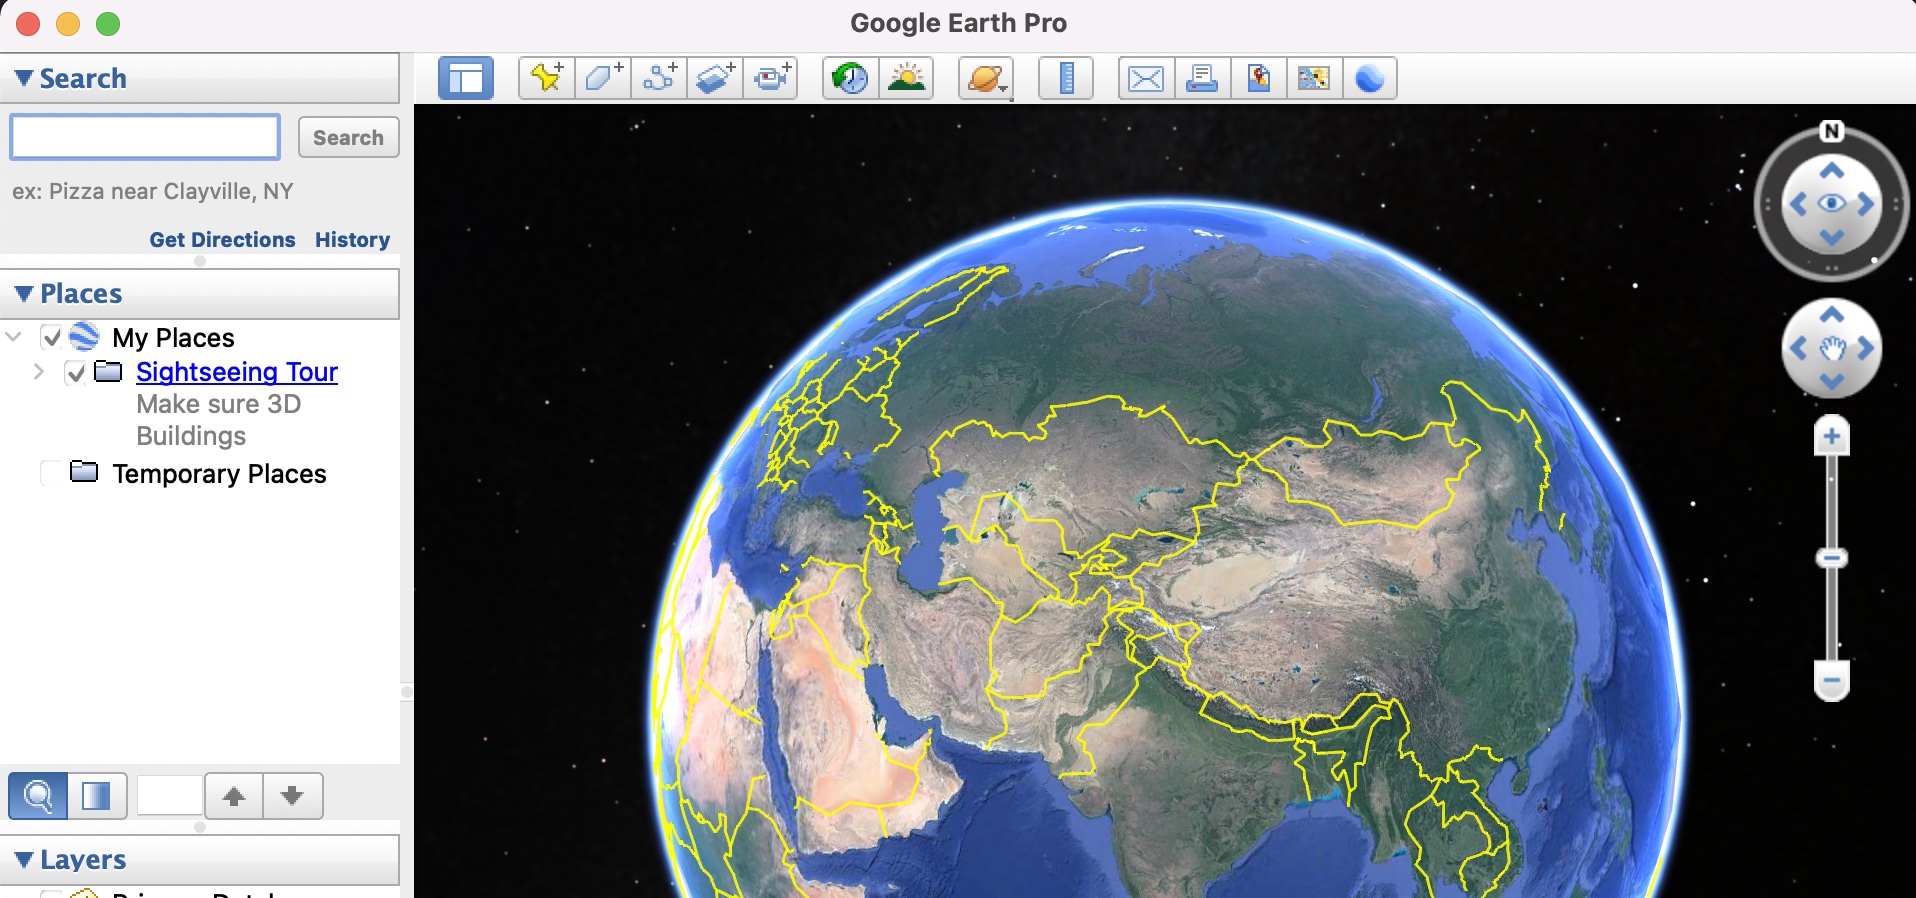 How to change the name and description of a place on Google Earth